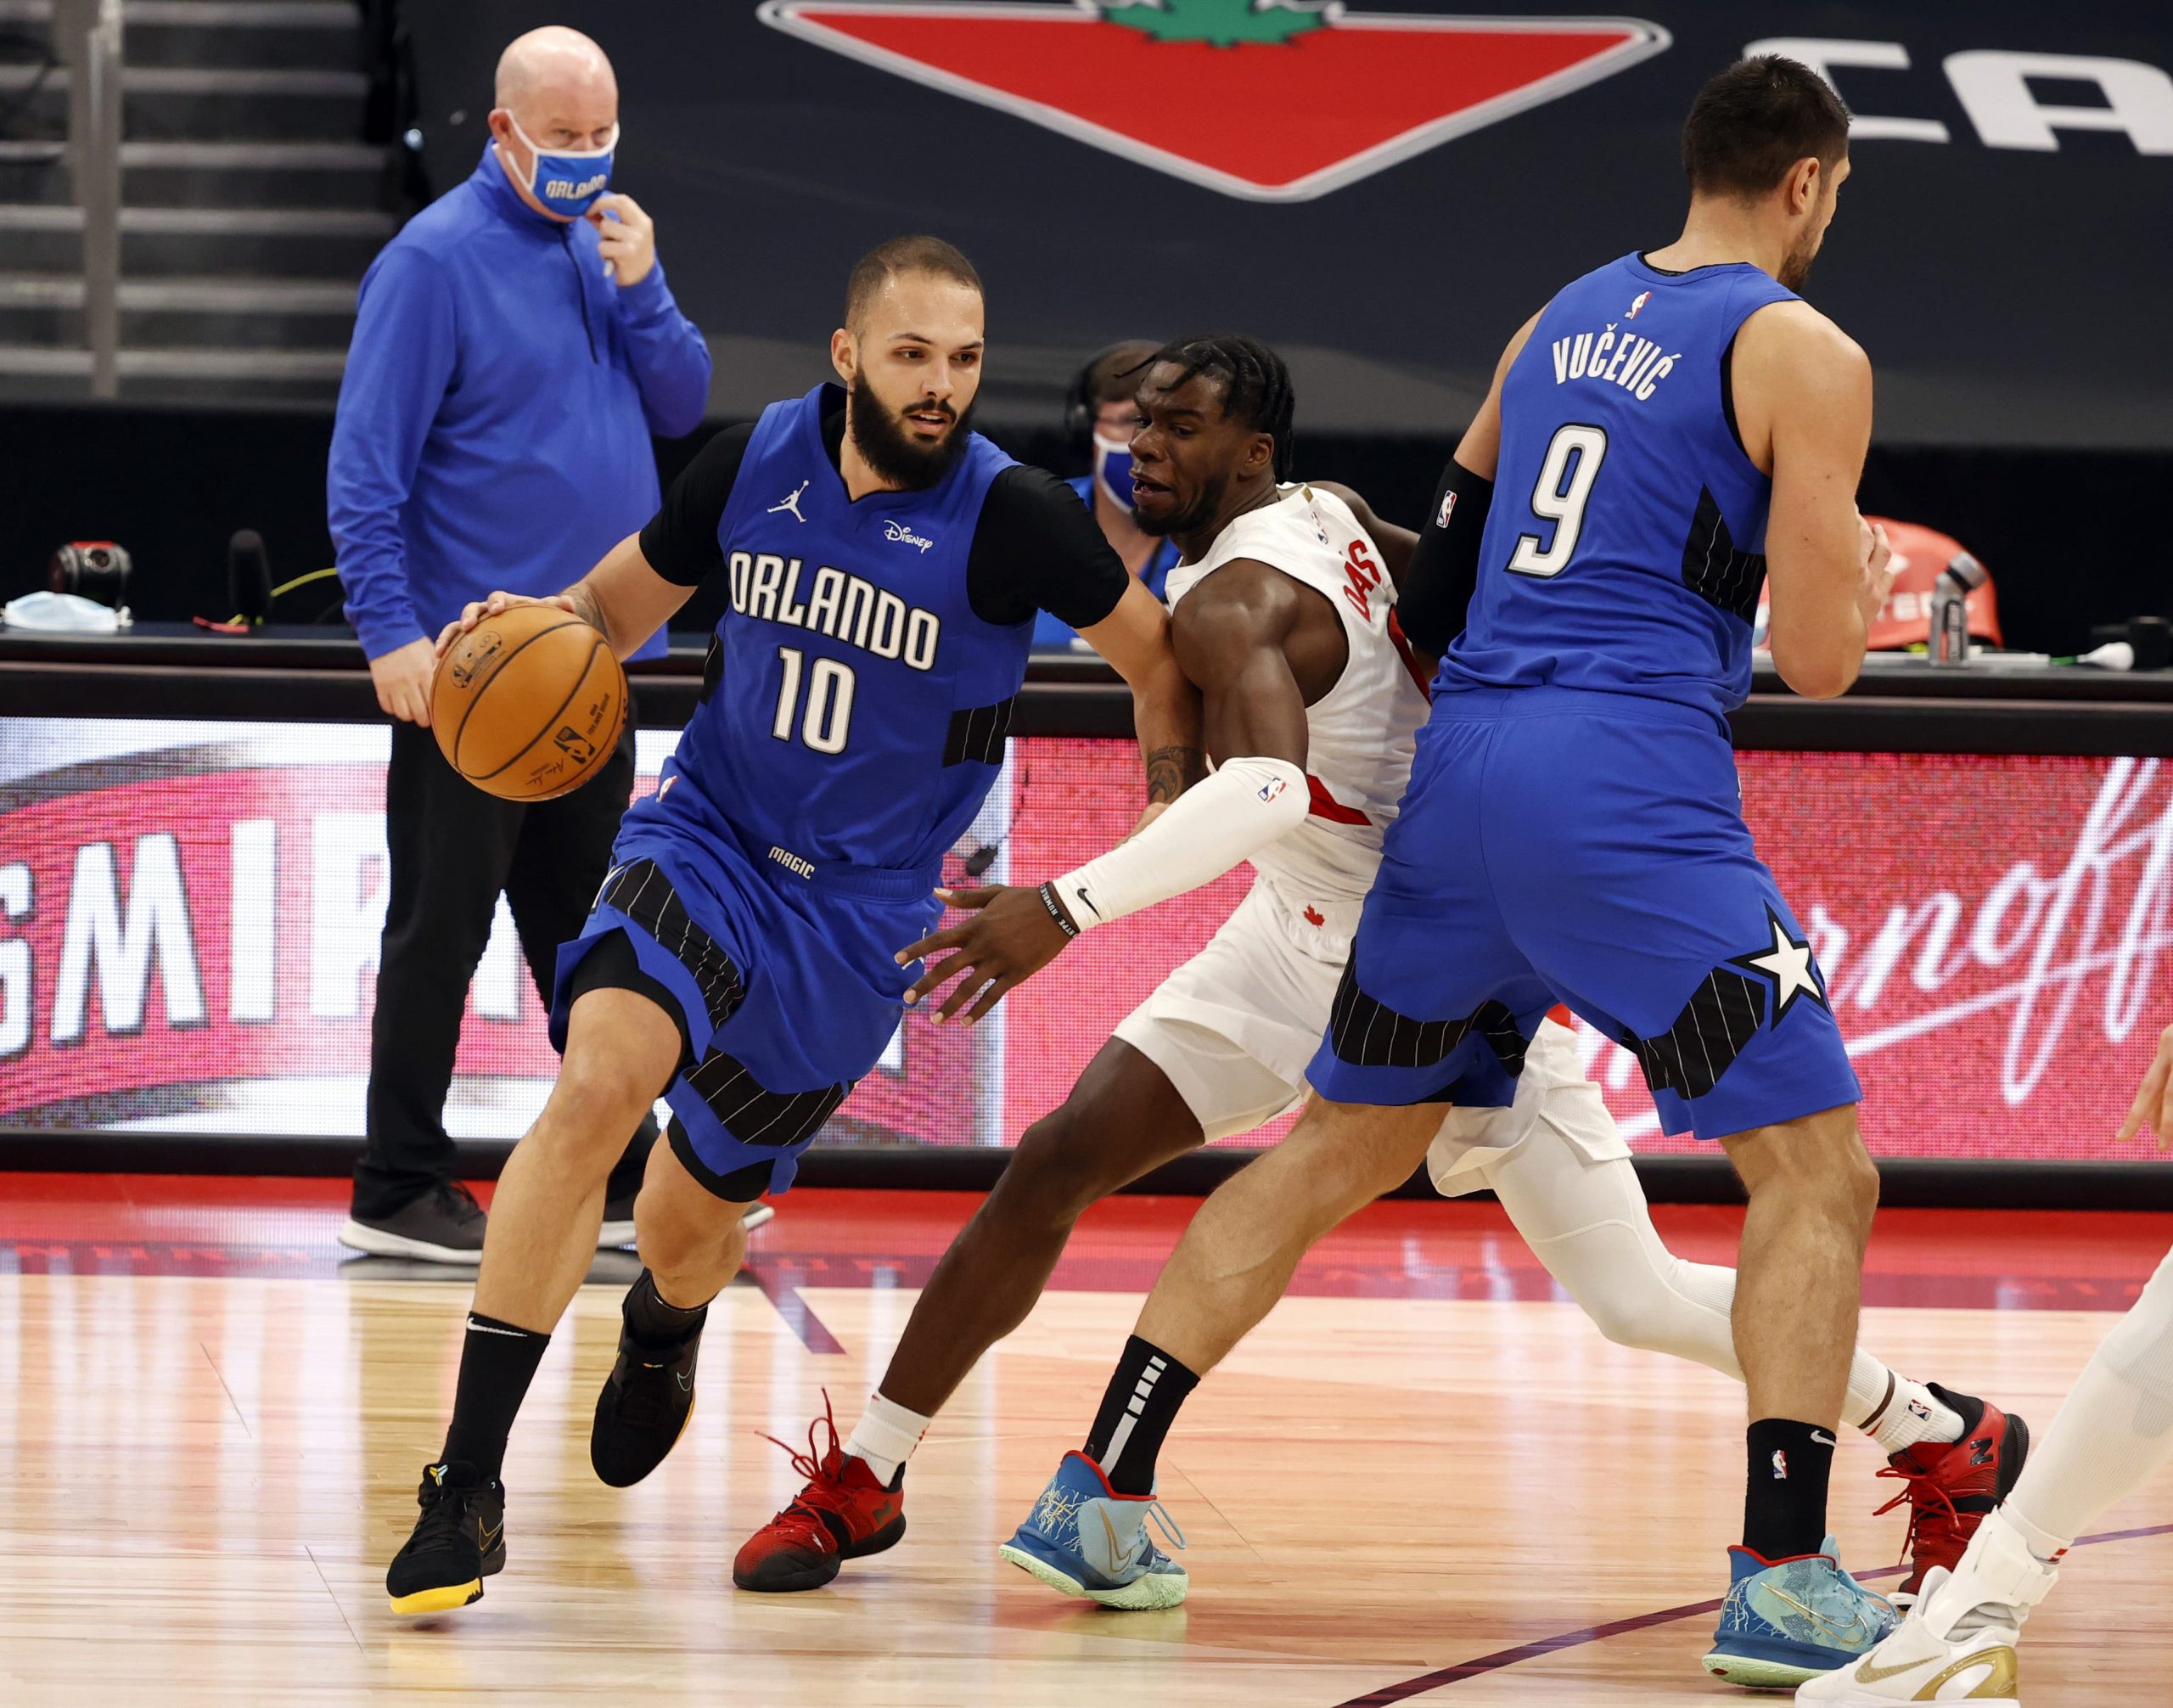 Orlando Magic guard Evan Fournier (10) drives to the basket around center Nikola Vucevic (9) and Toronto Raptors guard Terence Davis (middle) during the second half at Amalie Arena.